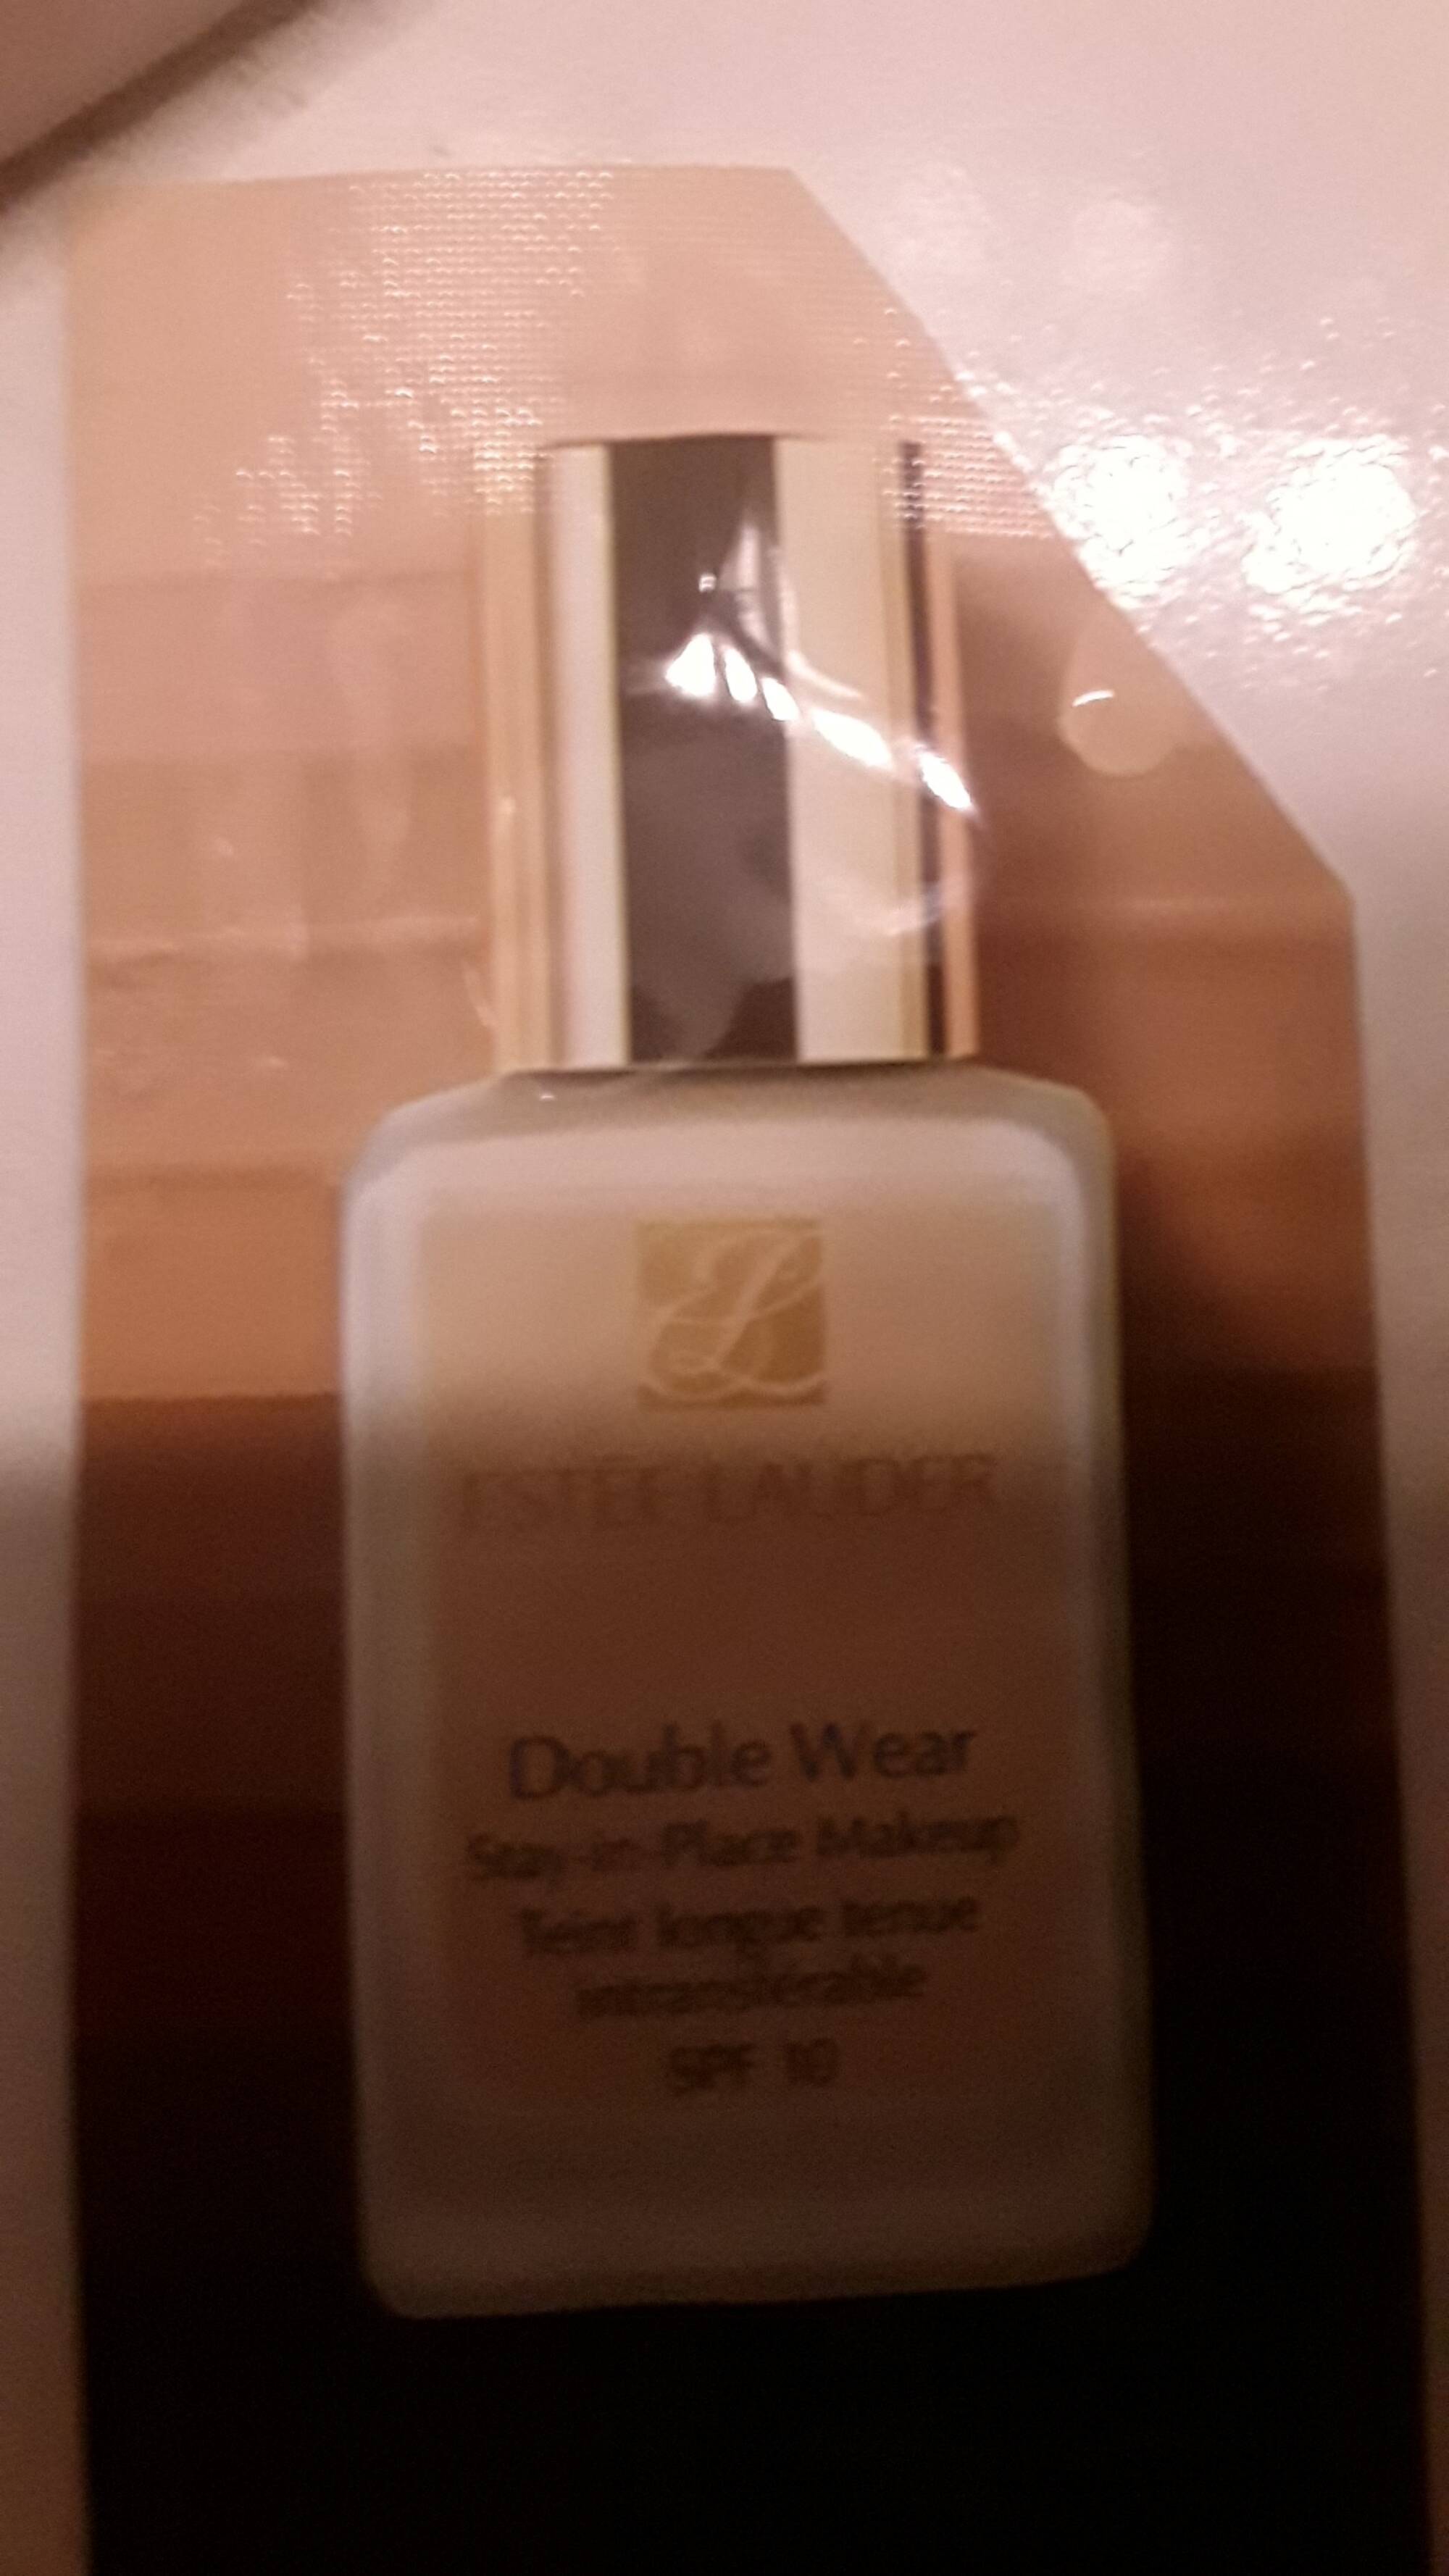 ESTEE LAUDER - Double Wear - Stay in place makeup